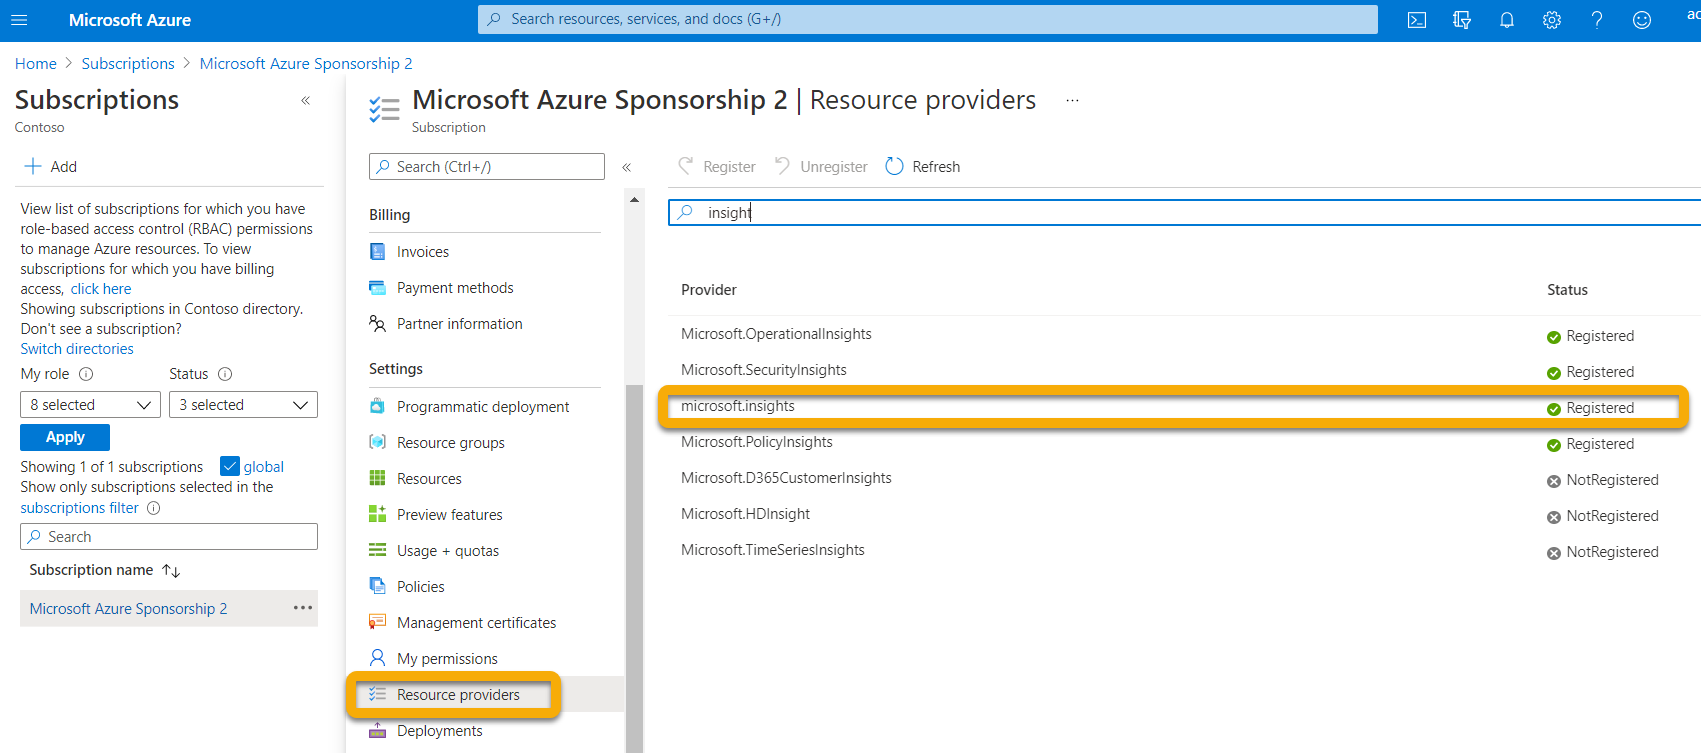 Image of resource providers in Microsoft Azure.